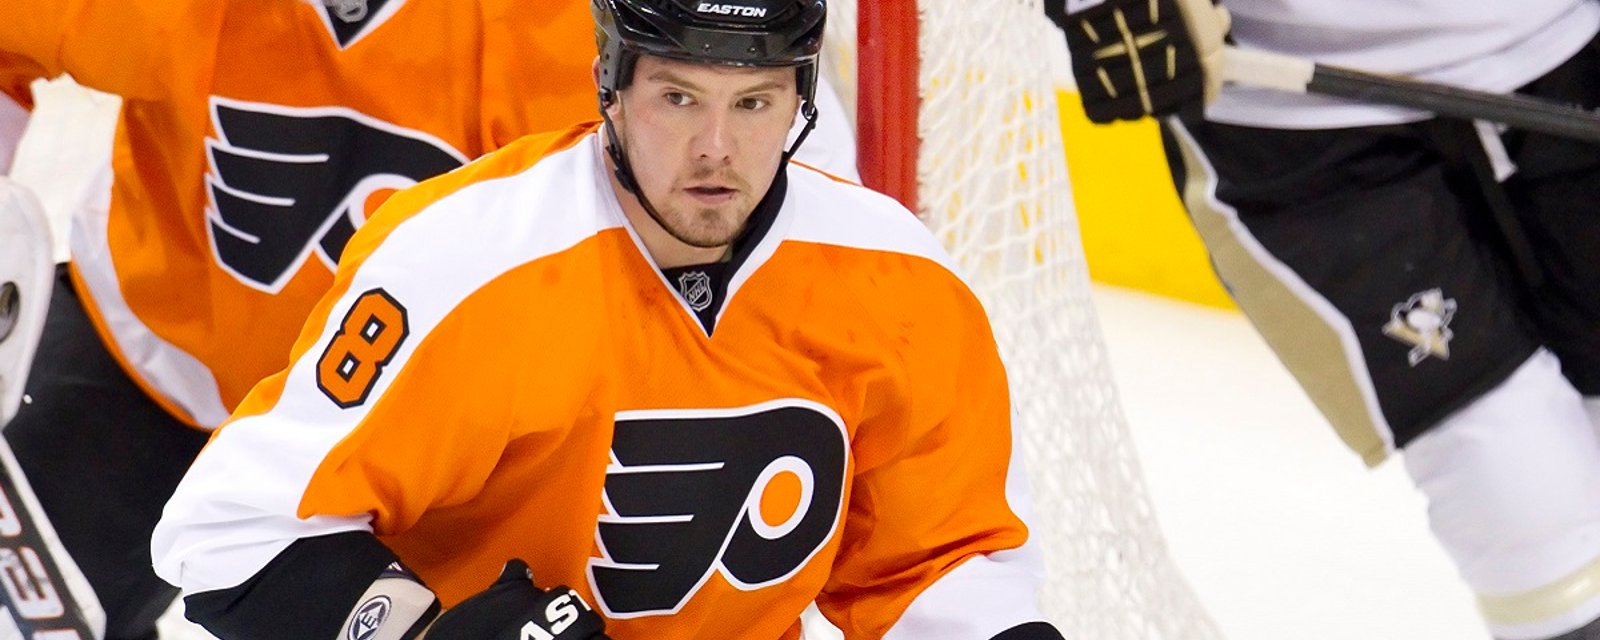 Breaking: Flames reportedly close to signing veteran defenseman to PTO.